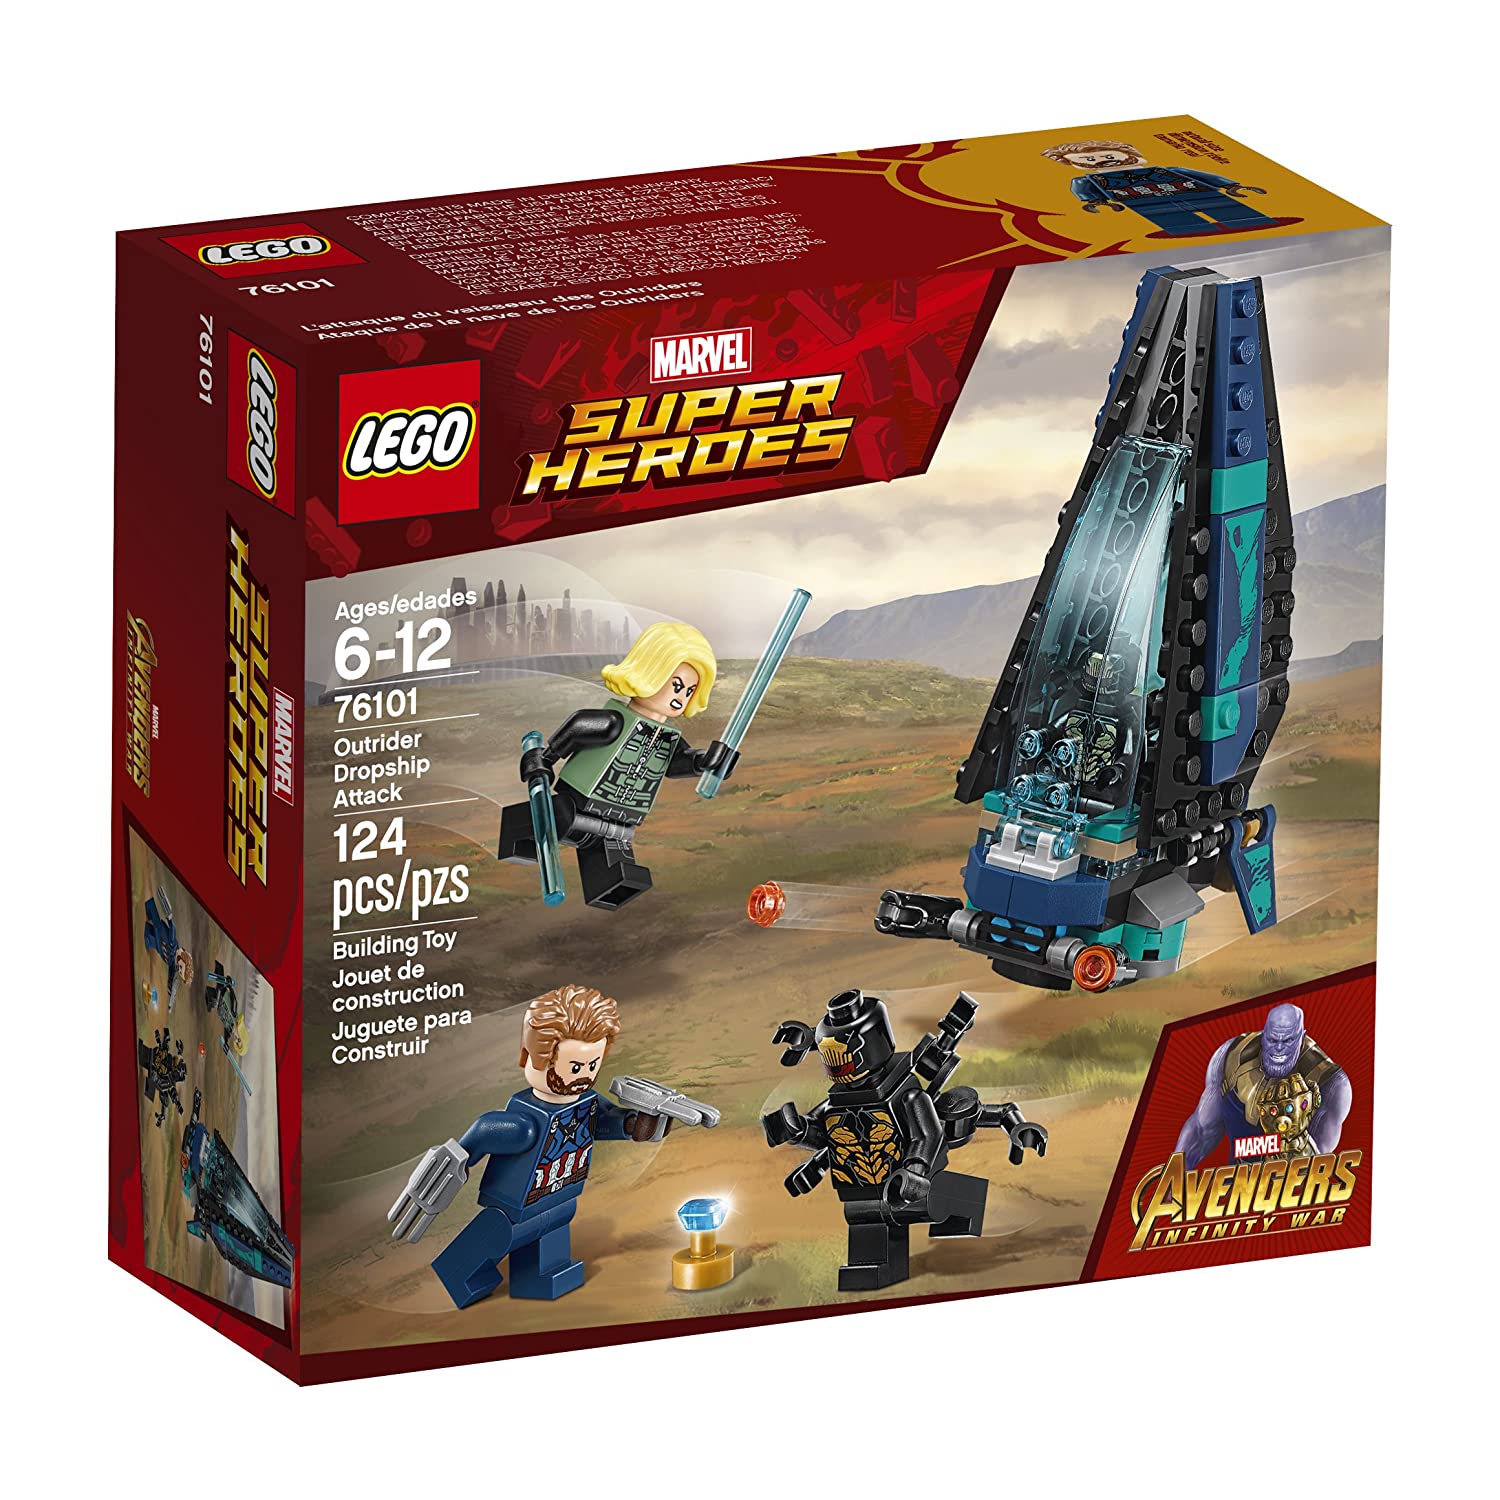 Top 9 Best LEGO Avengers Infinity War Sets Reviews in 2022 6